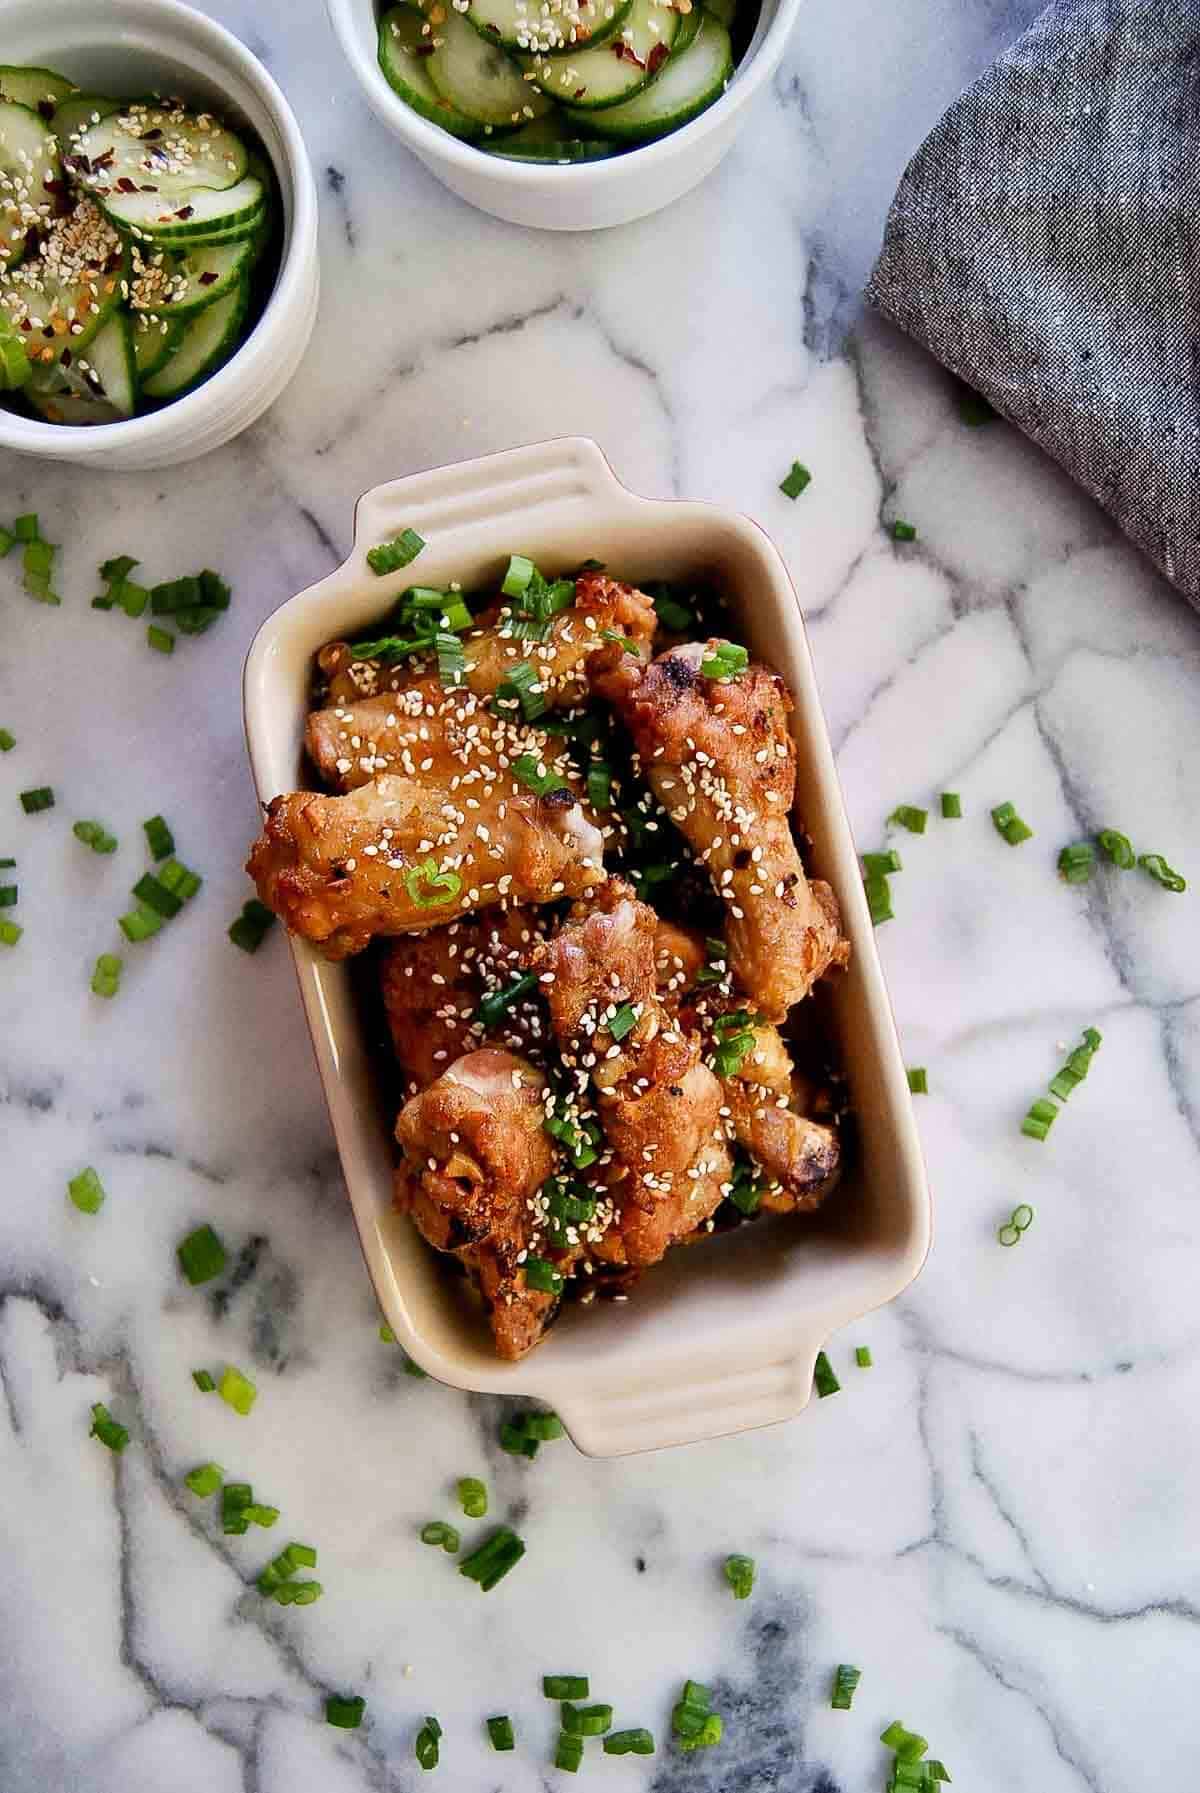 soy garlic chicken wings in serving dish with cucumber salad on the side.